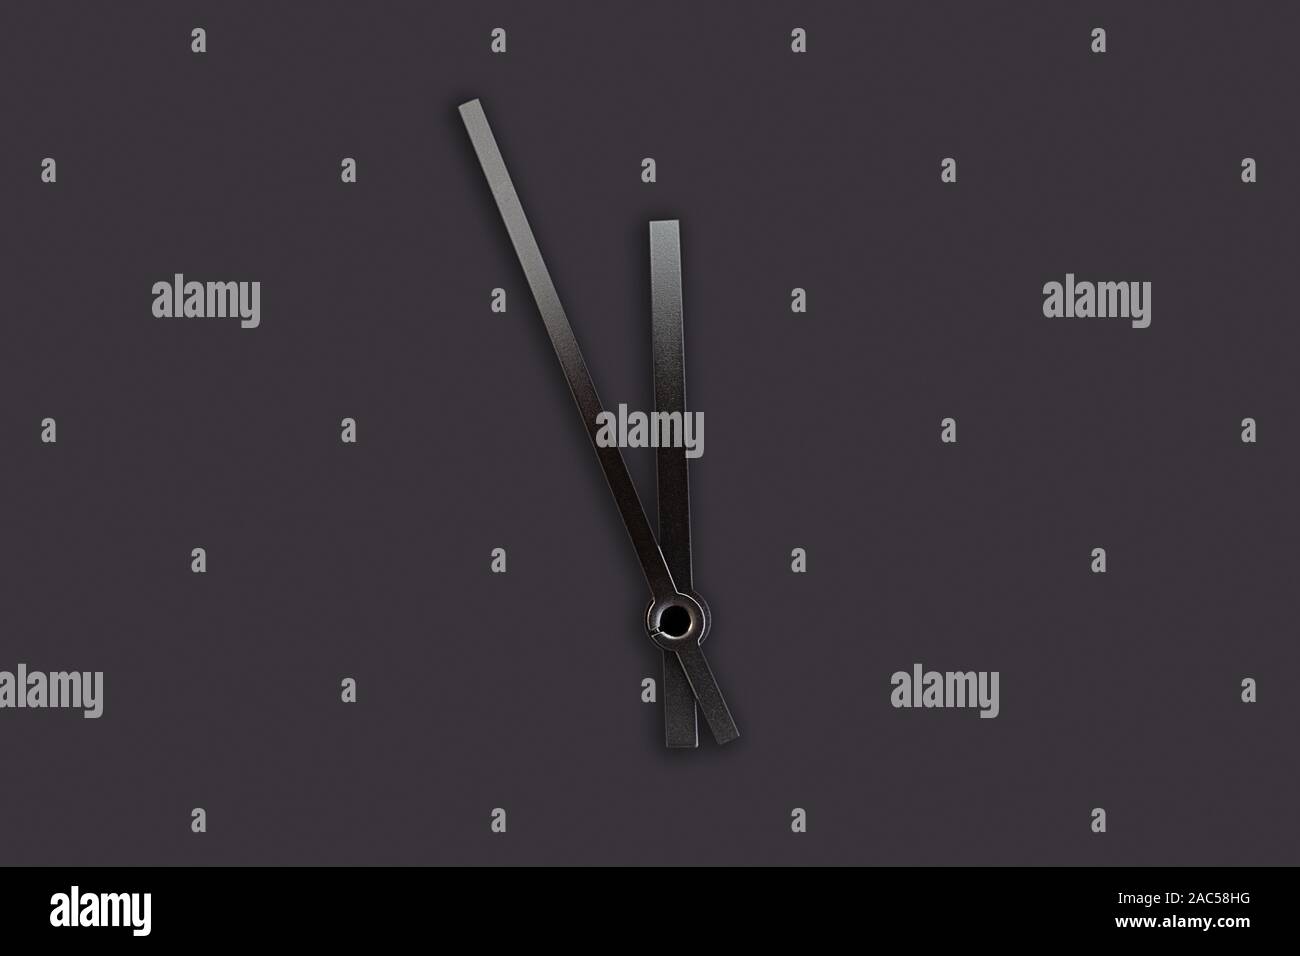 black pointers of a clock isolated on black background Stock Photo